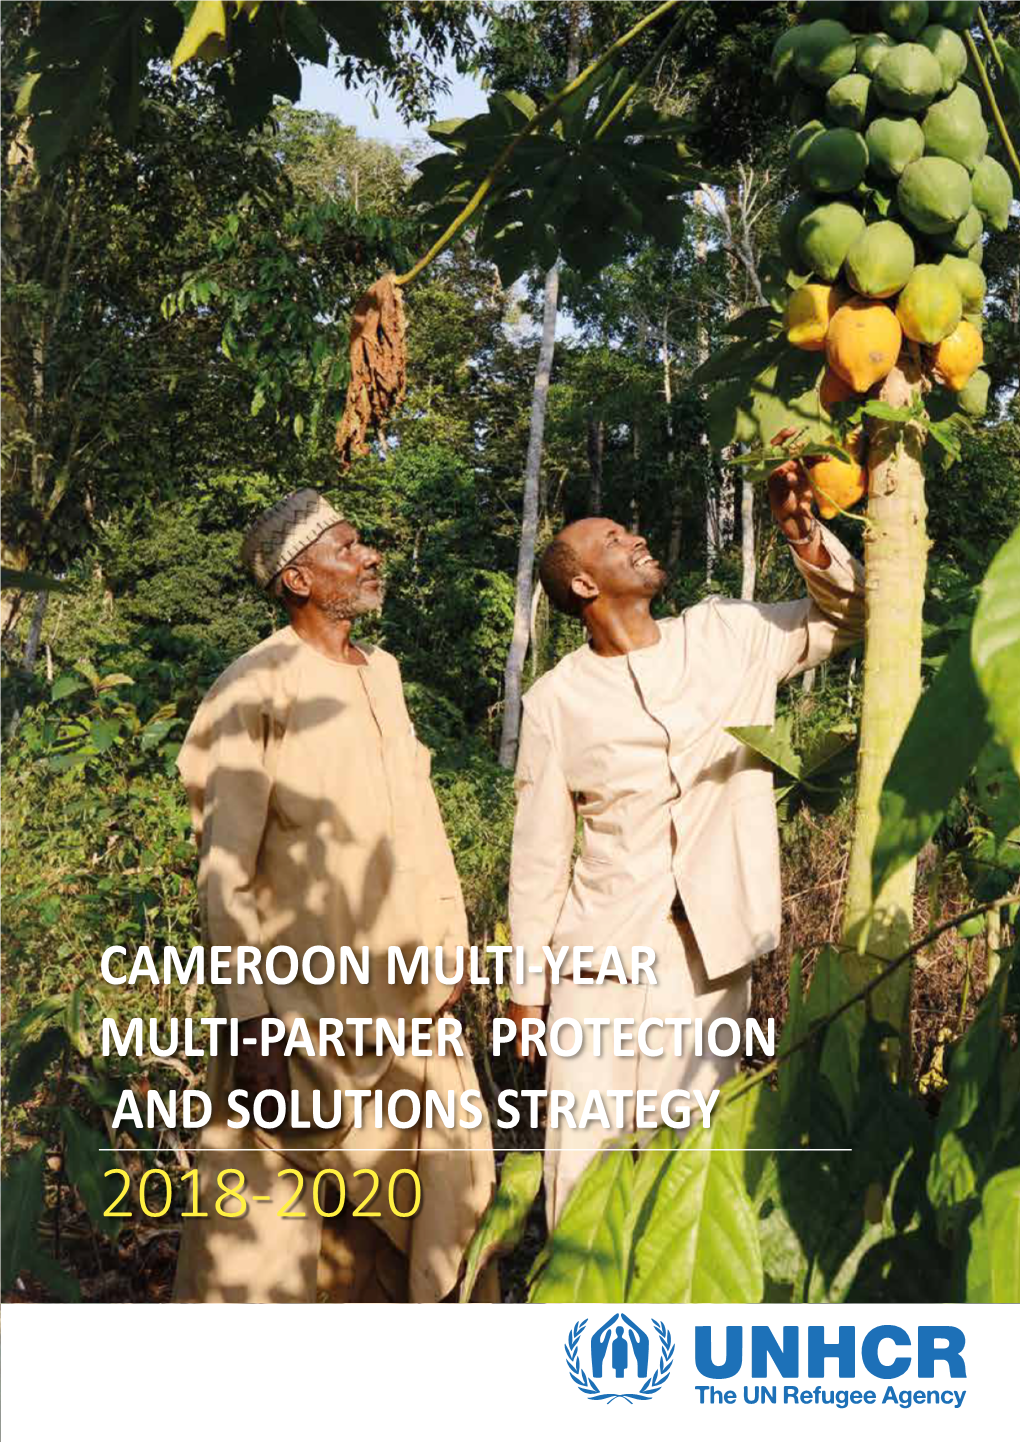 Cameroon Multi-Year Multi-Partner Protection and Solutions Strategy 2018-2020